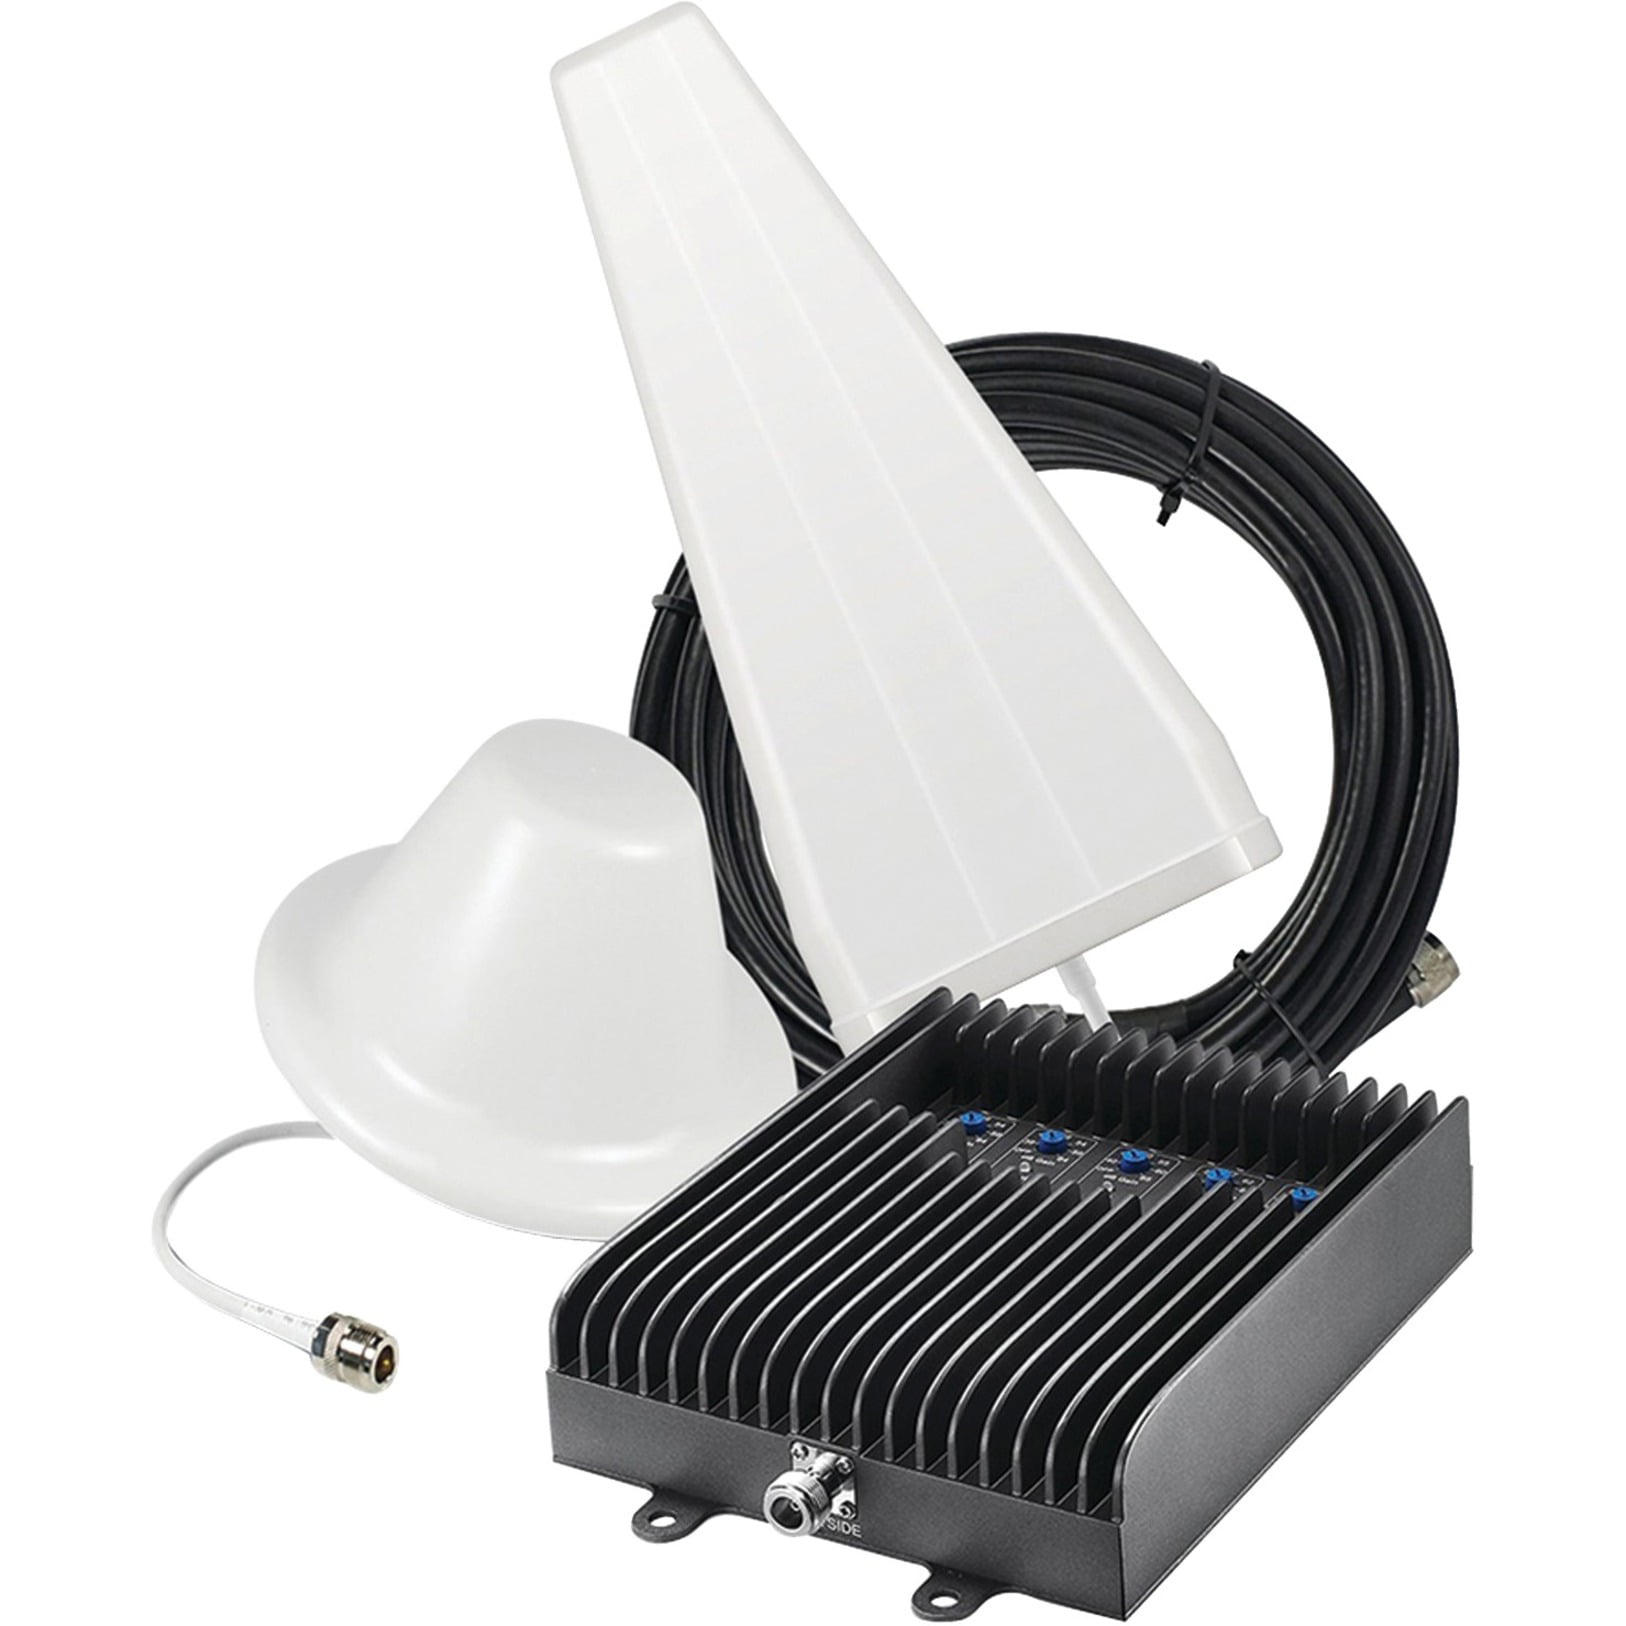 Renewed data for 4G SureCall Flare Cell Phone Signal Booster for Home Omni Antenna Configuration LTE Integrated indoor antenna for easier install Boosts Voice Covers up to 2500 sq ft 3G